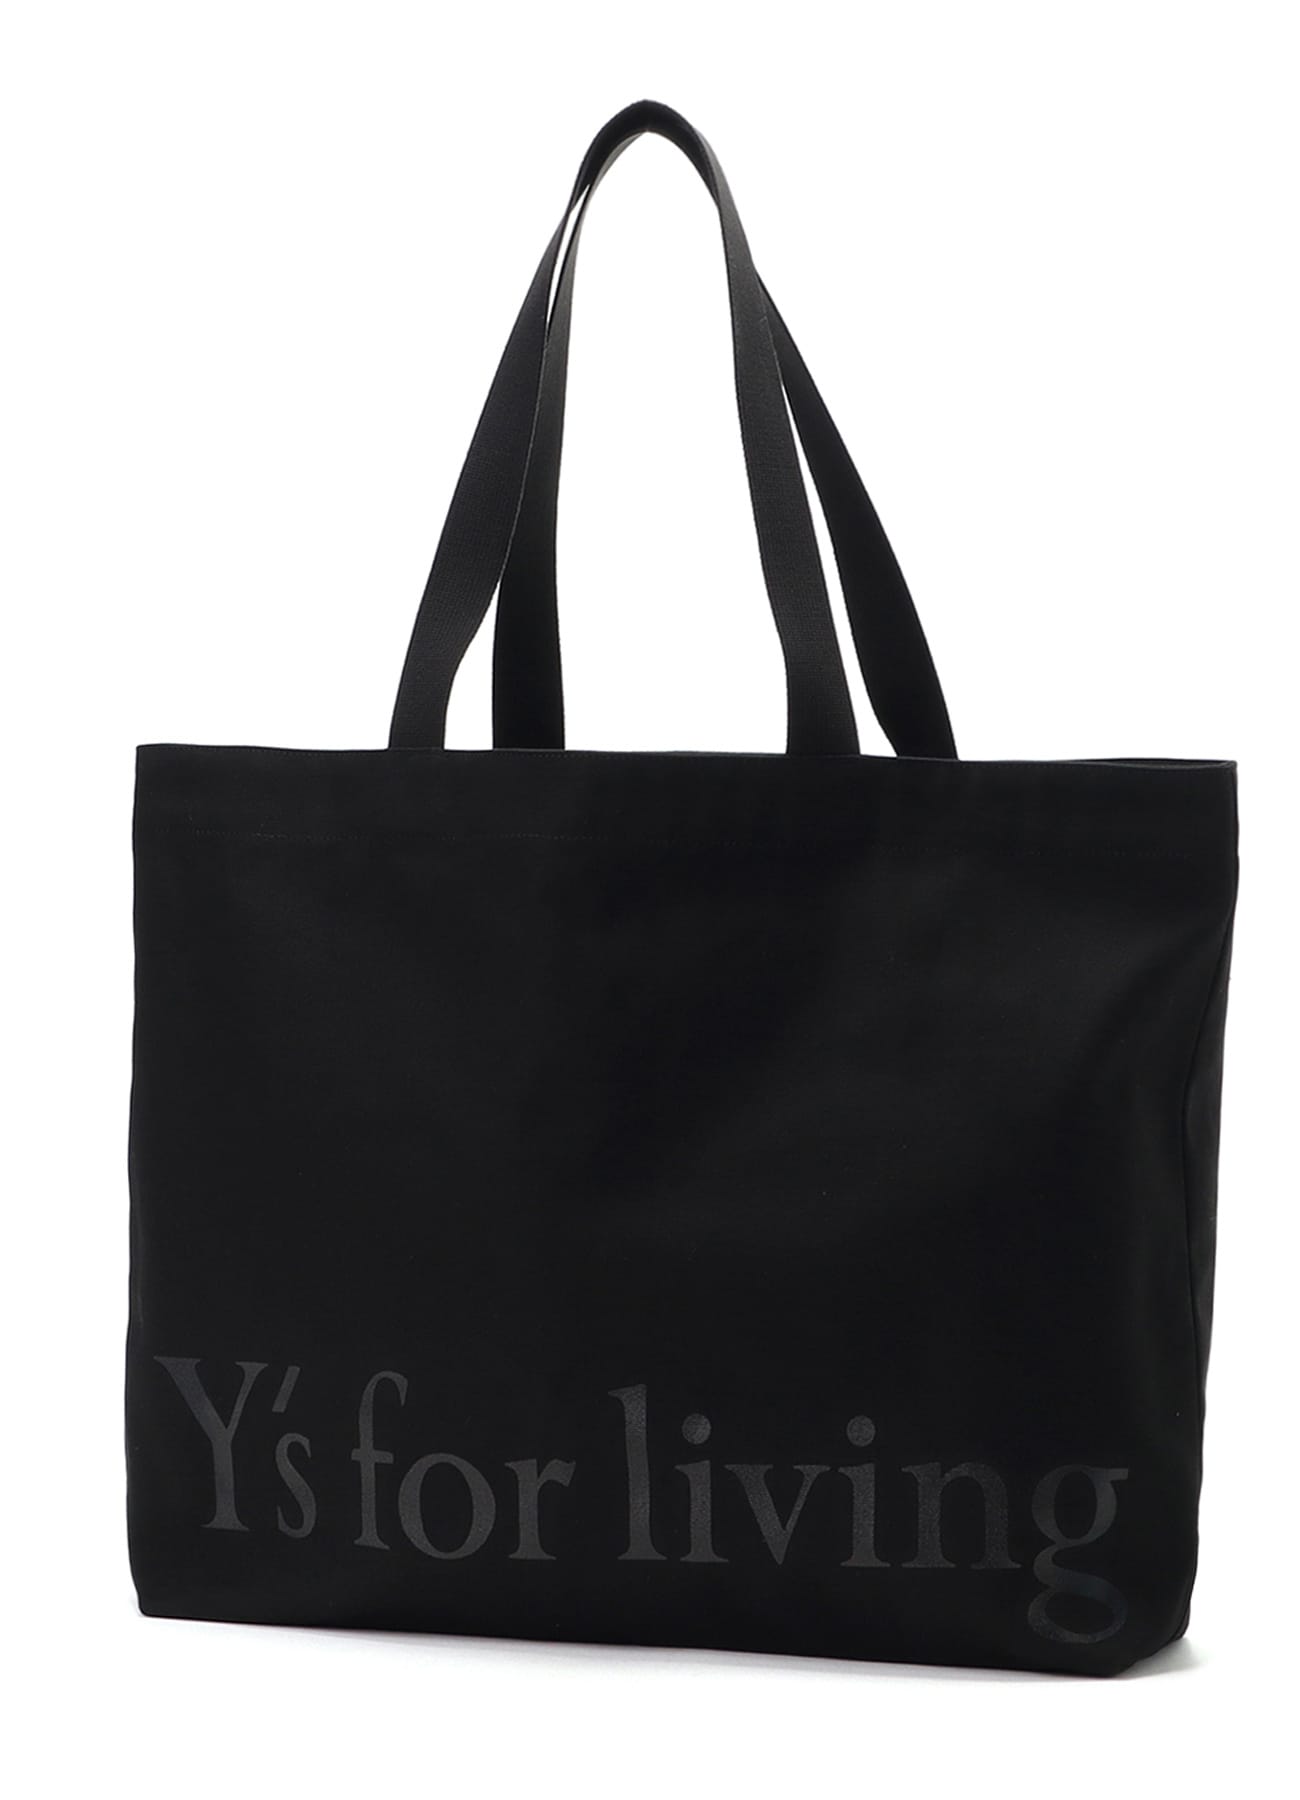 OXFORD LOGO TOTE BAG(FREE SIZE Black): Y's for living｜THE SHOP 